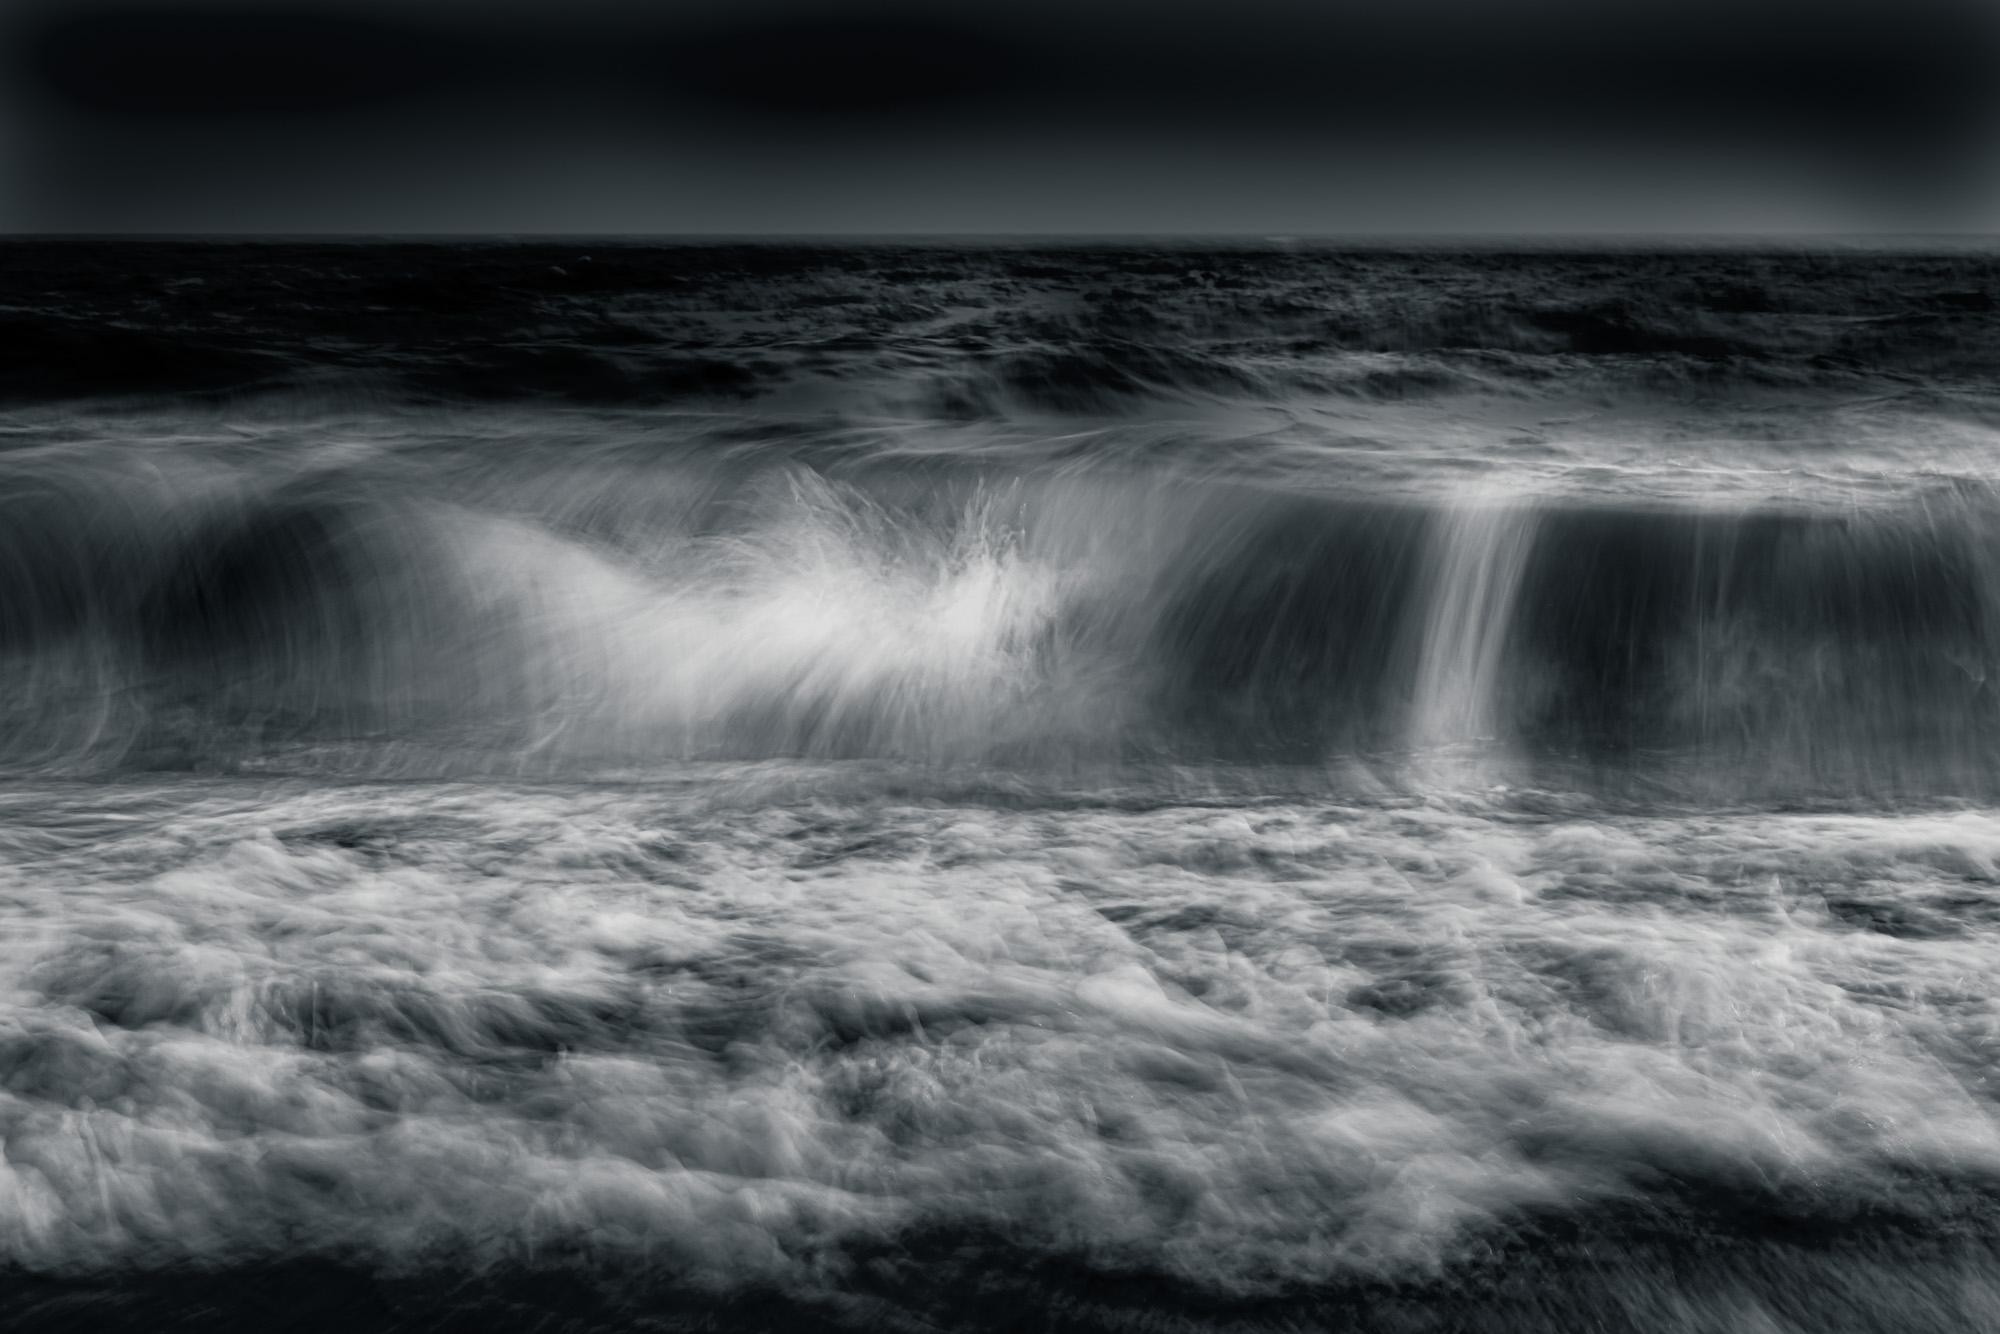 Howard Lewis Landscape Photograph - Limited Edition Black and White Photograph Ocean, Water, Waves, Untitled #54